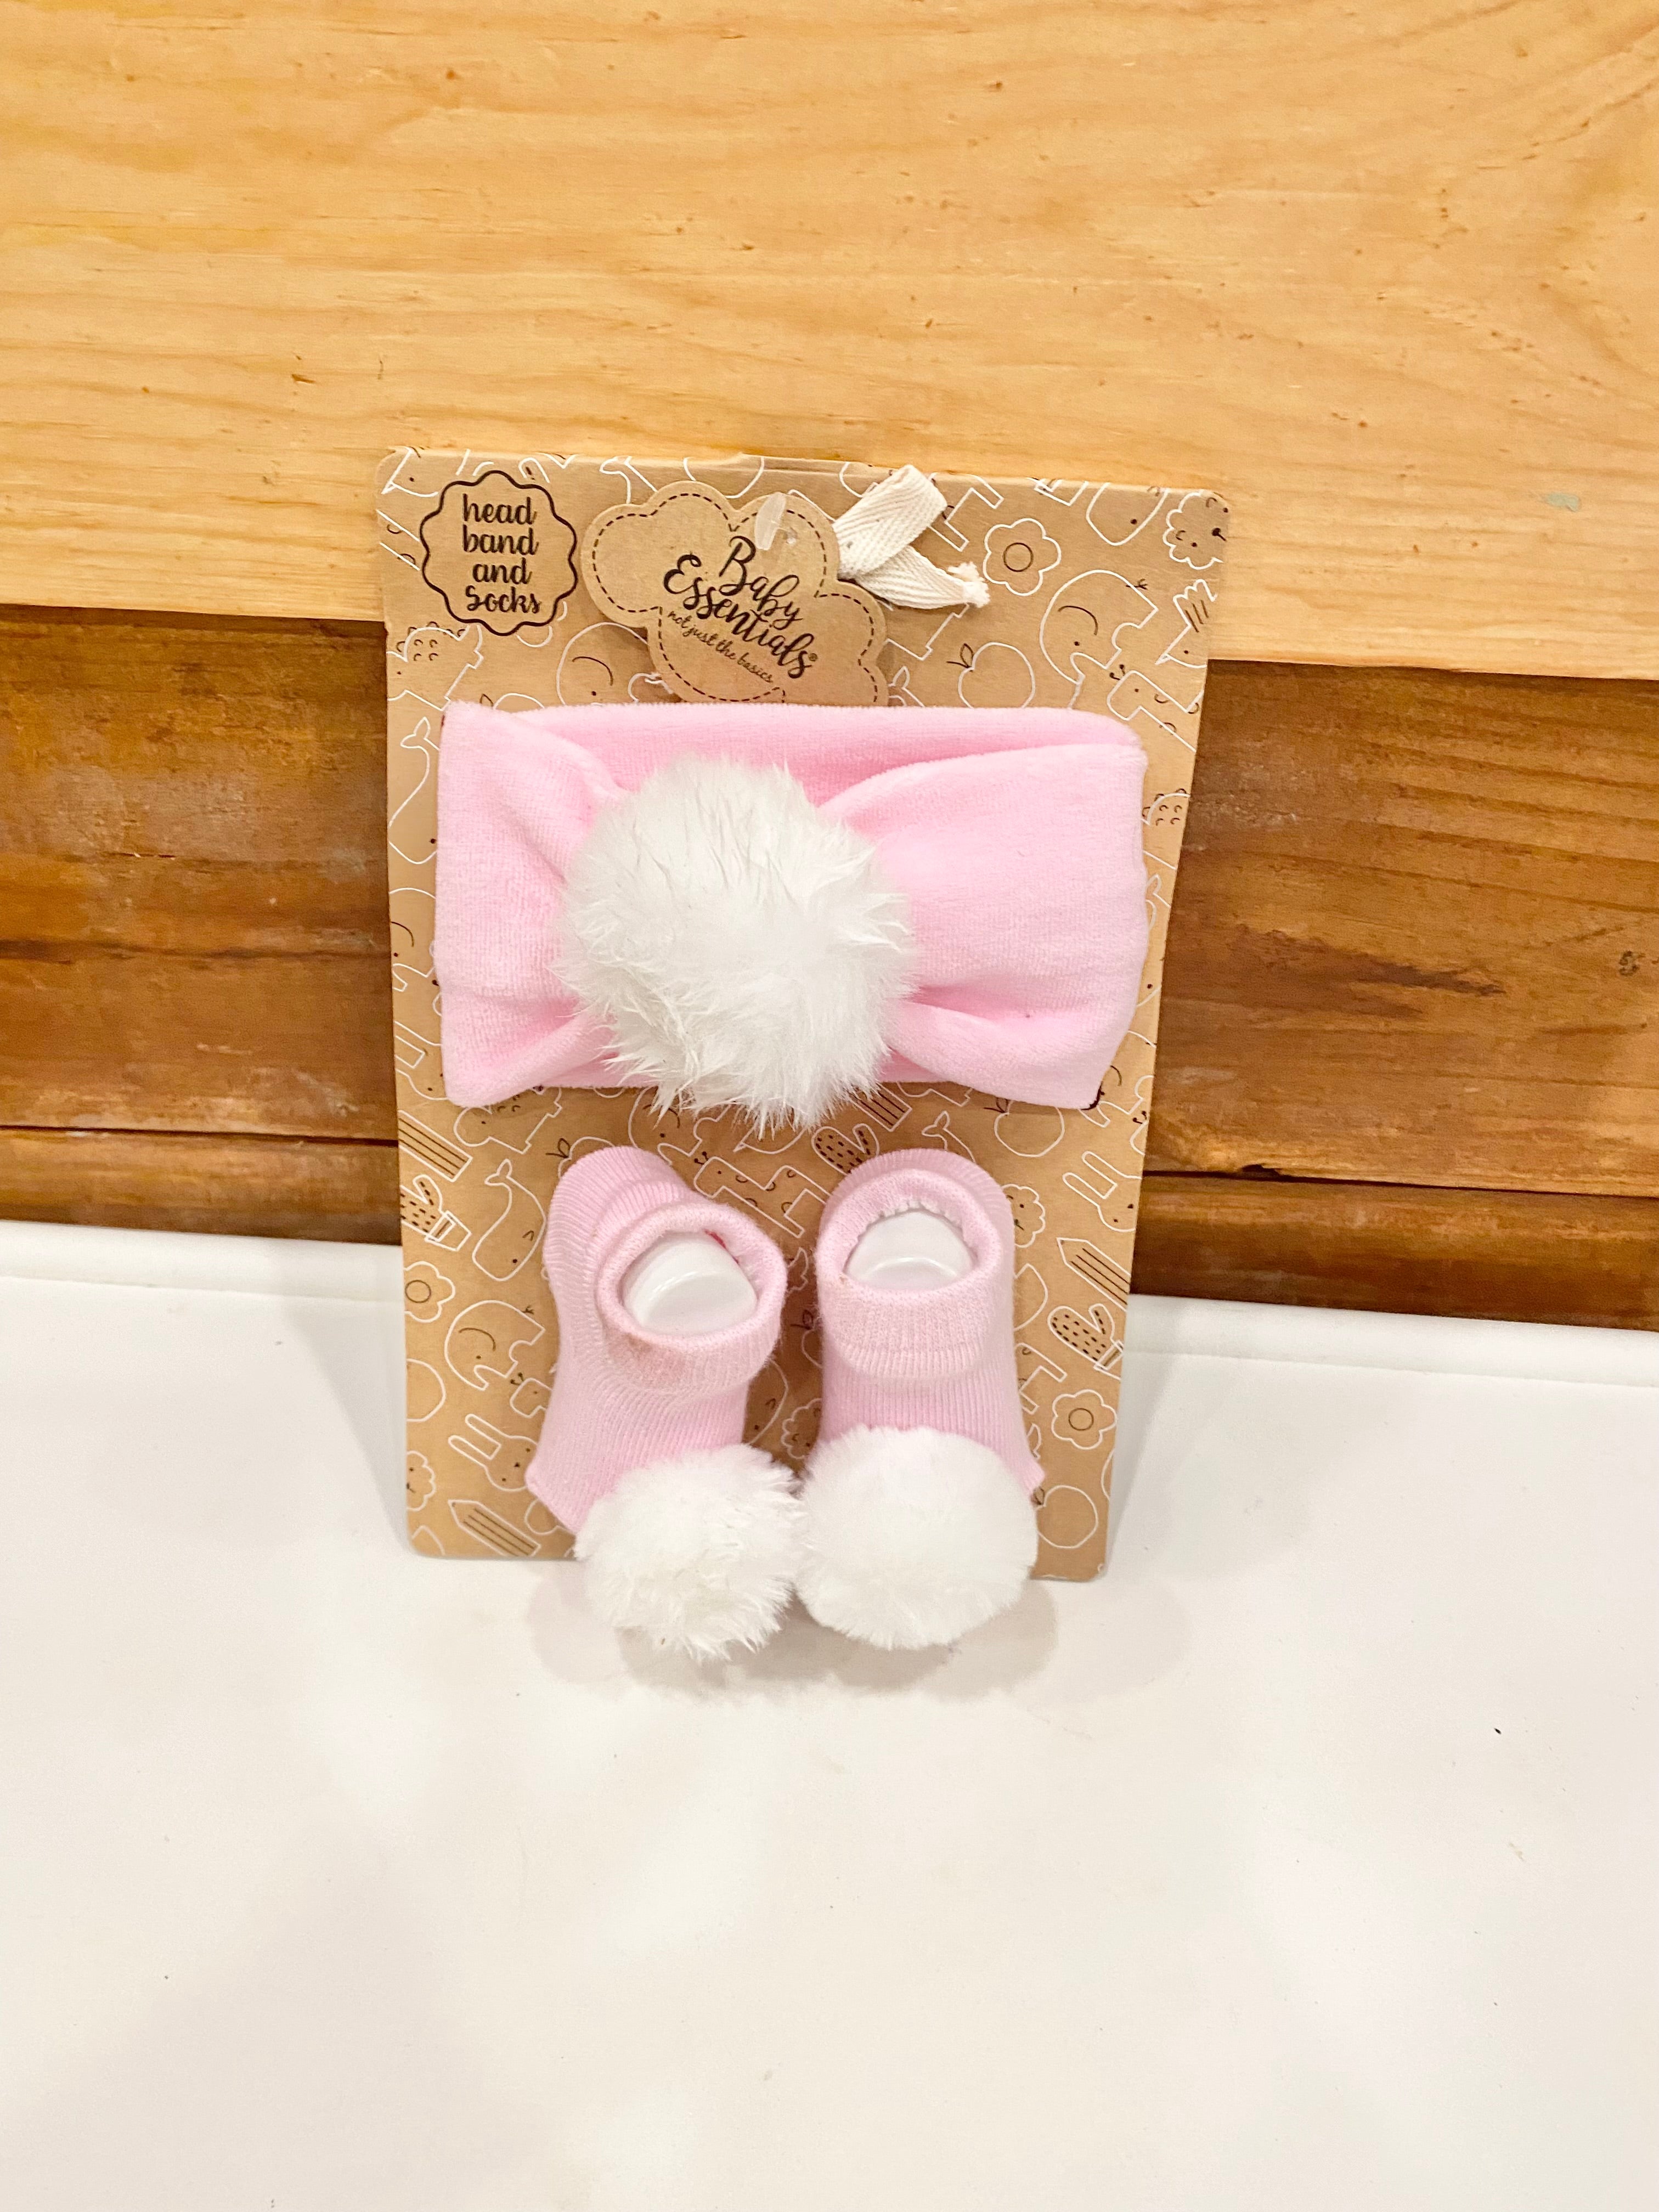 3pc Pink Easter Bunny Pajamas 18 Doll Outfit w Slippers- American Clothes  & Accessories PJ Set Includes Rabbit Shirt, Pants, & White Bunny Slippers